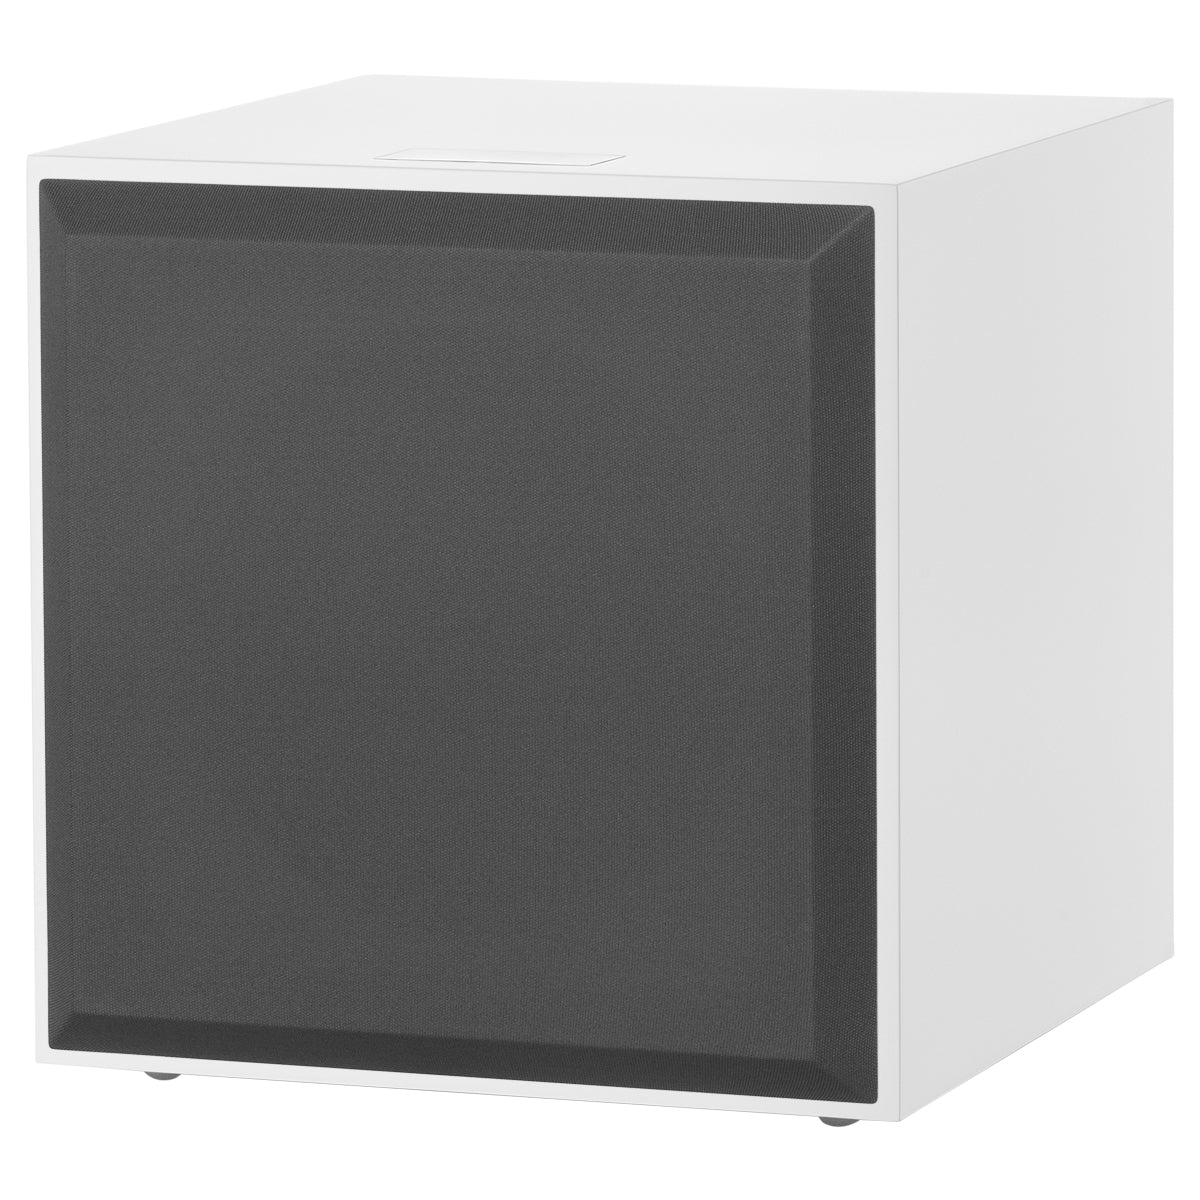 Bowers & Wilkins DB4S 10" Active Subwoofer - Satin White with Grey Grille - The Audio Experts